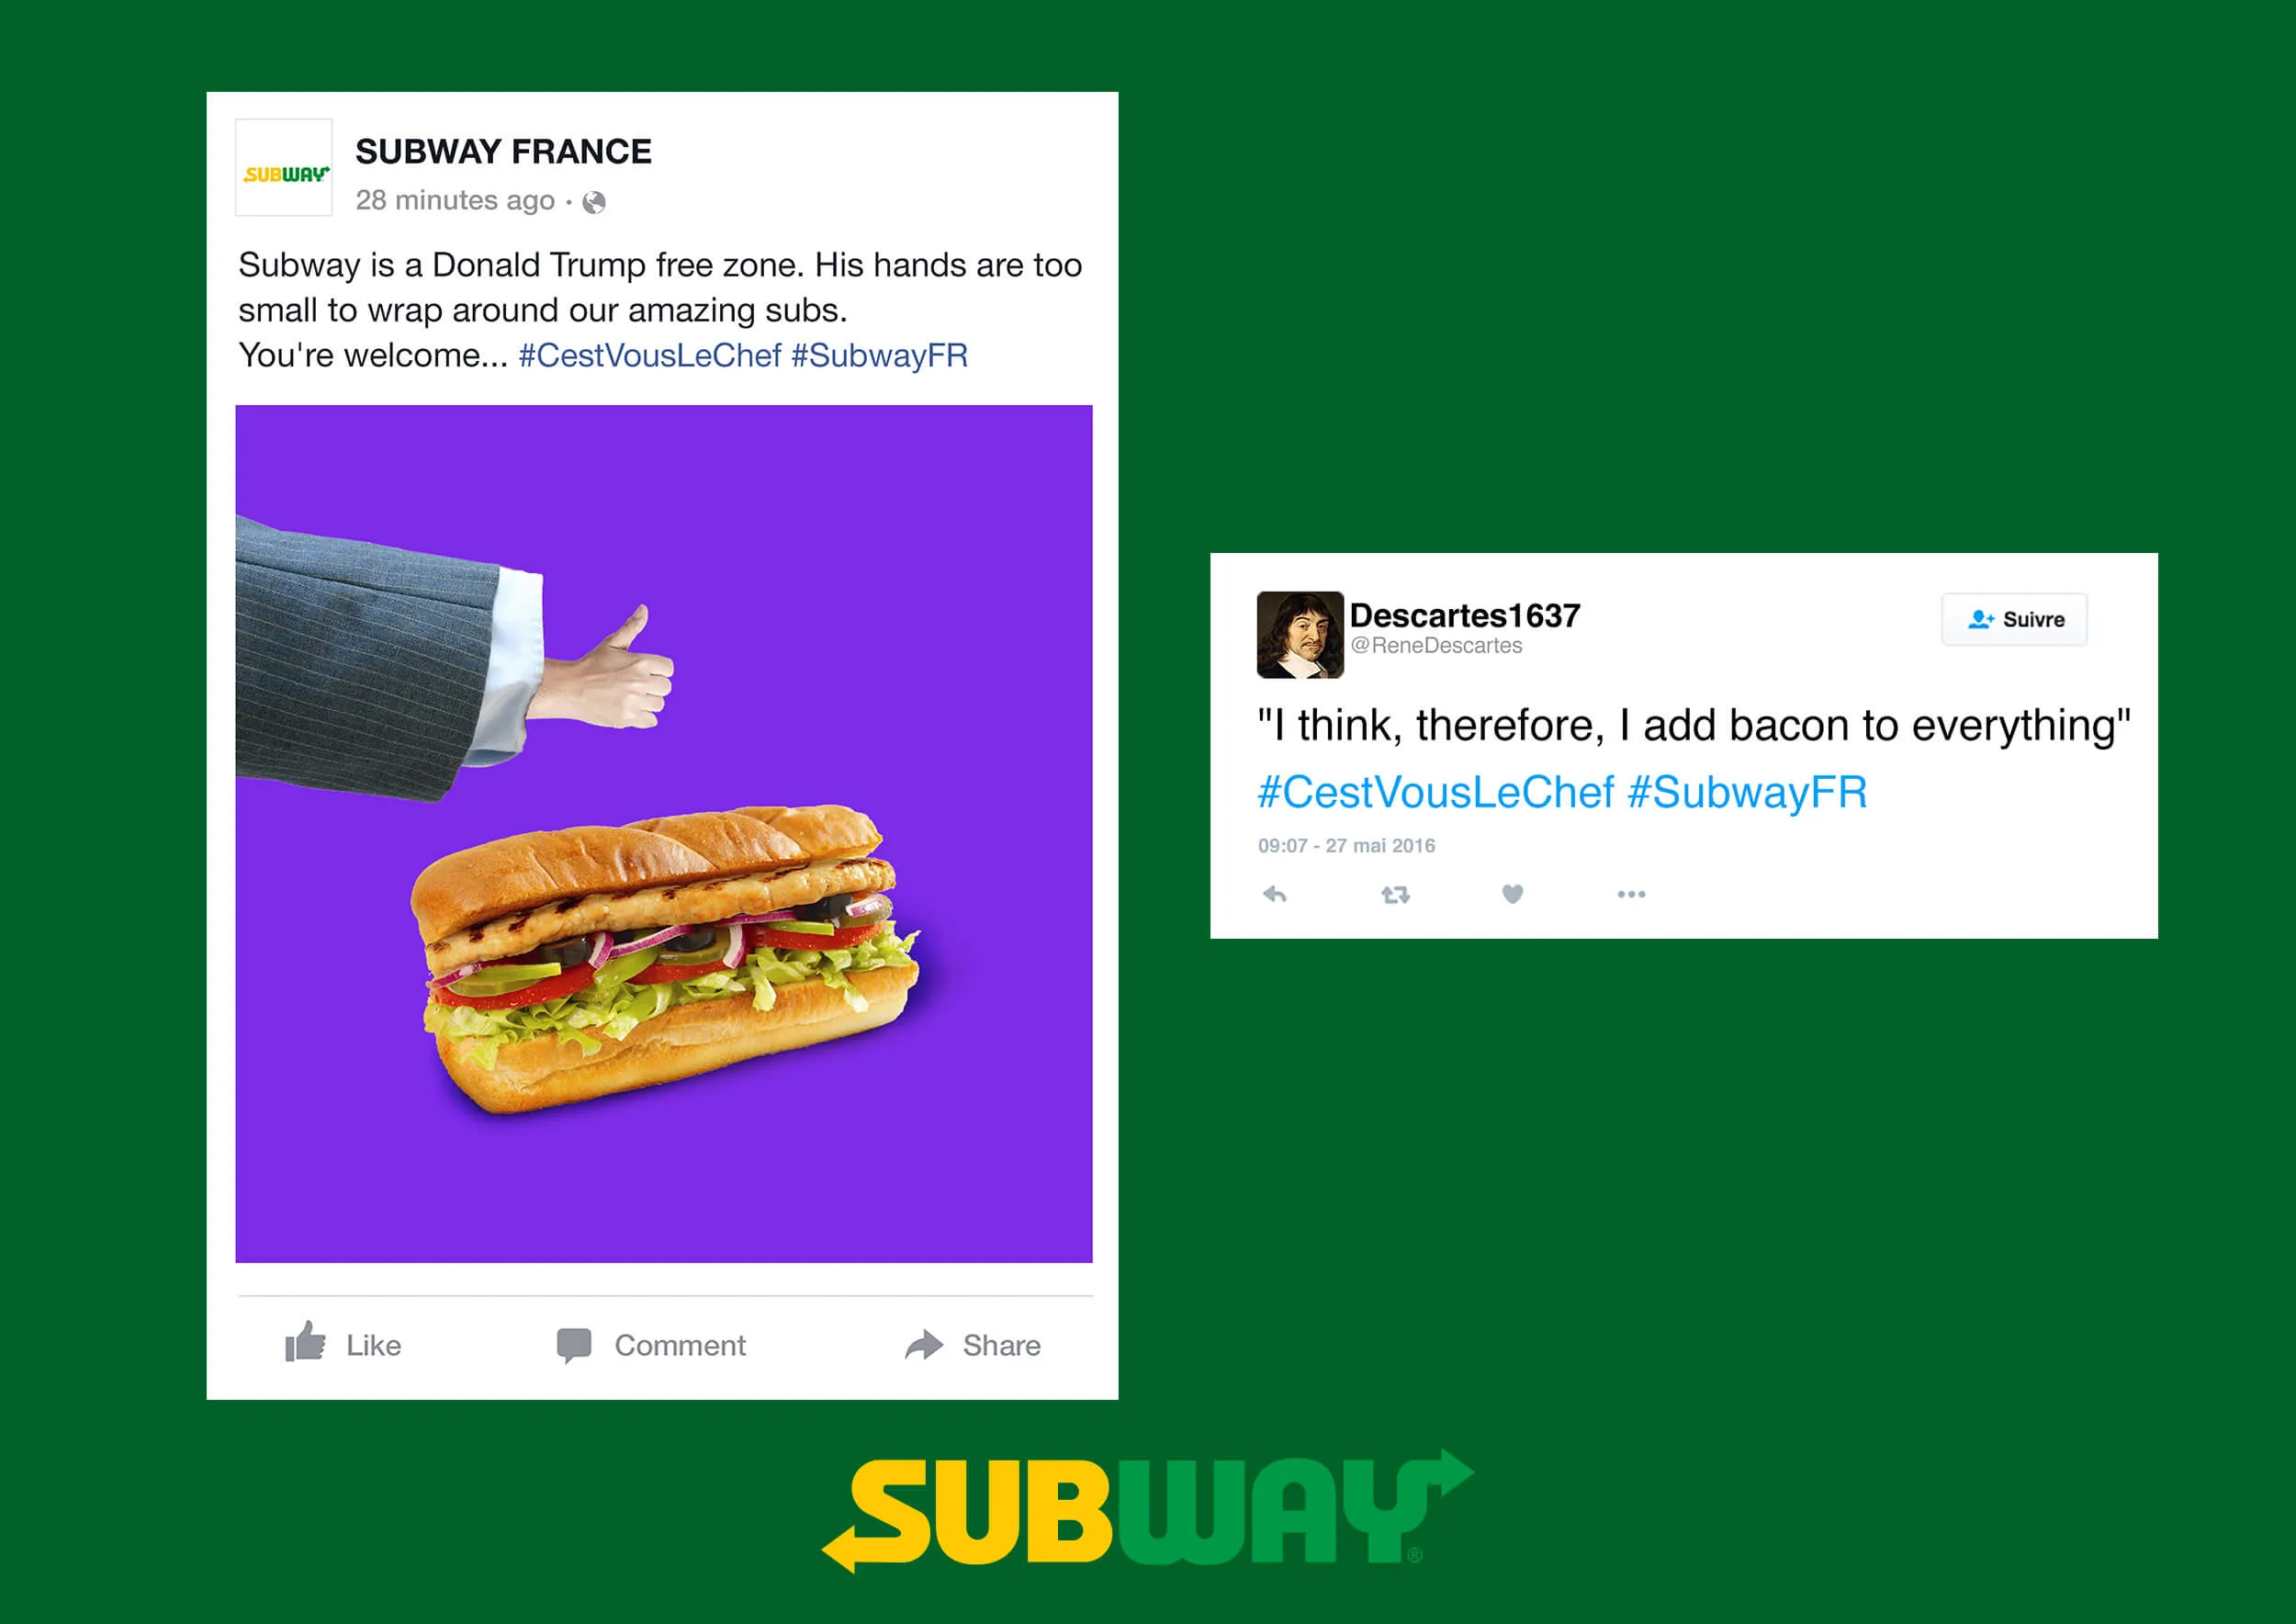 Facebook and Twitter posts for Subway Sandwiches France with Donald Trump and Descartes themes 